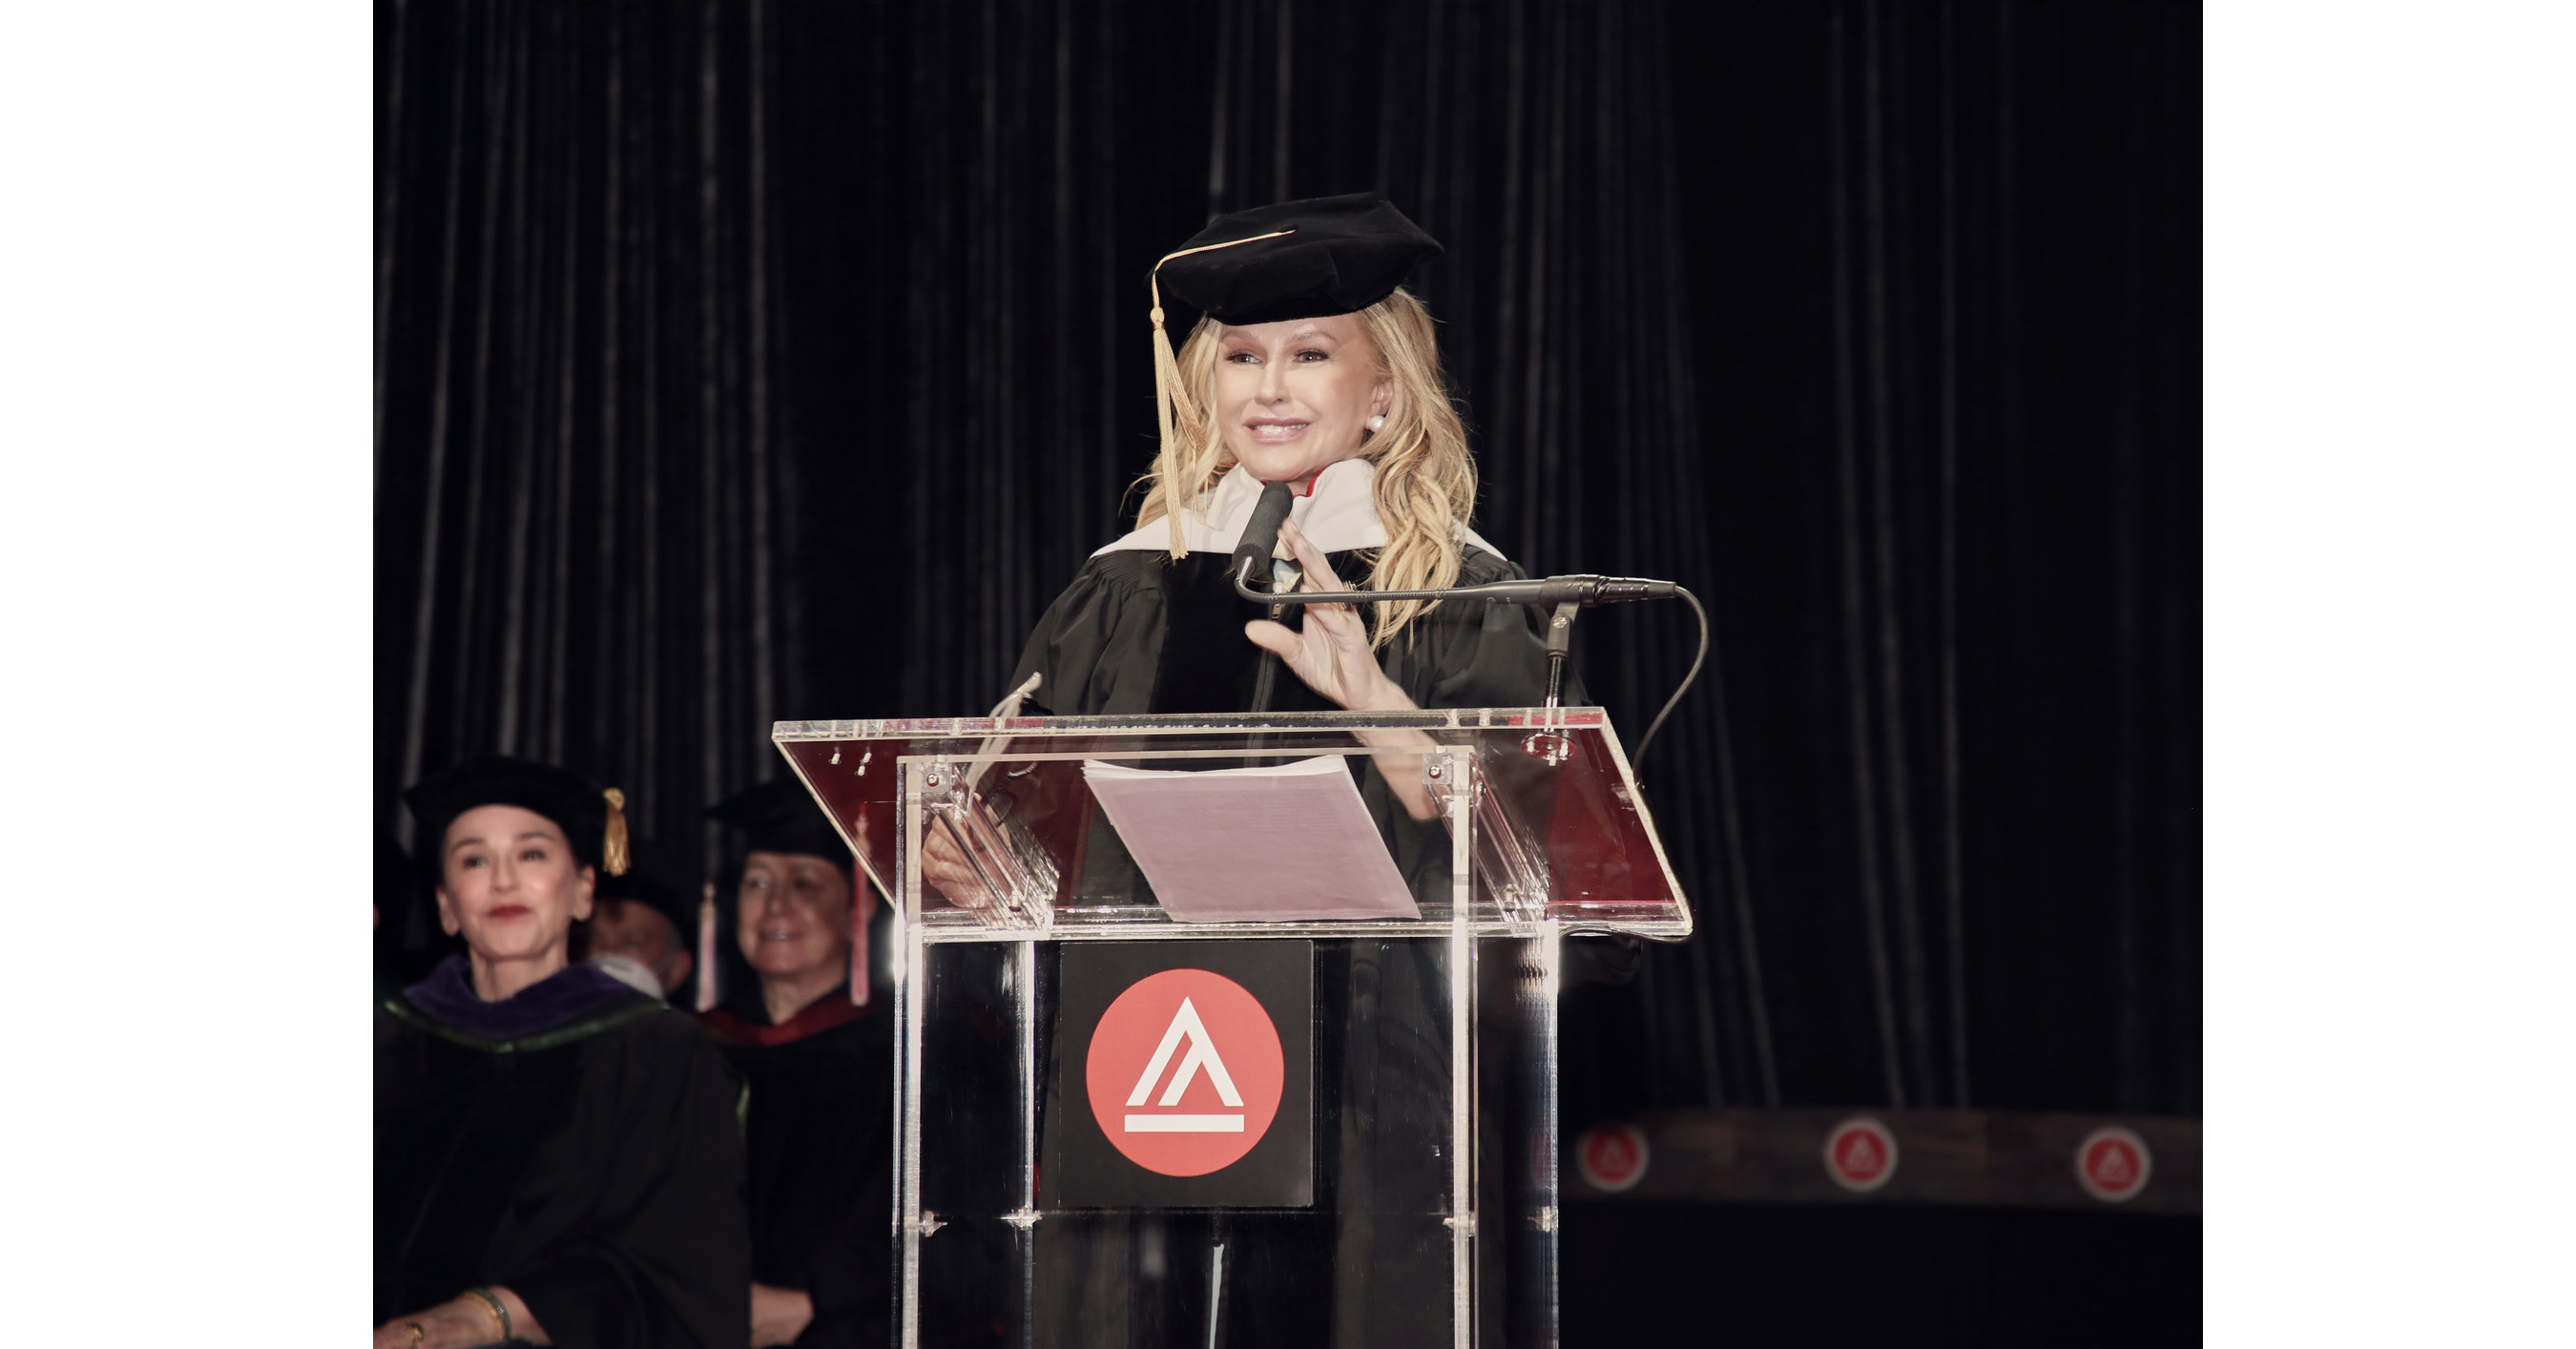 Famed Entrepreneur, Fashion Designer, and Philanthropist, Kathy Hilton Presented with Honorary Doctorate From Academy of Art University